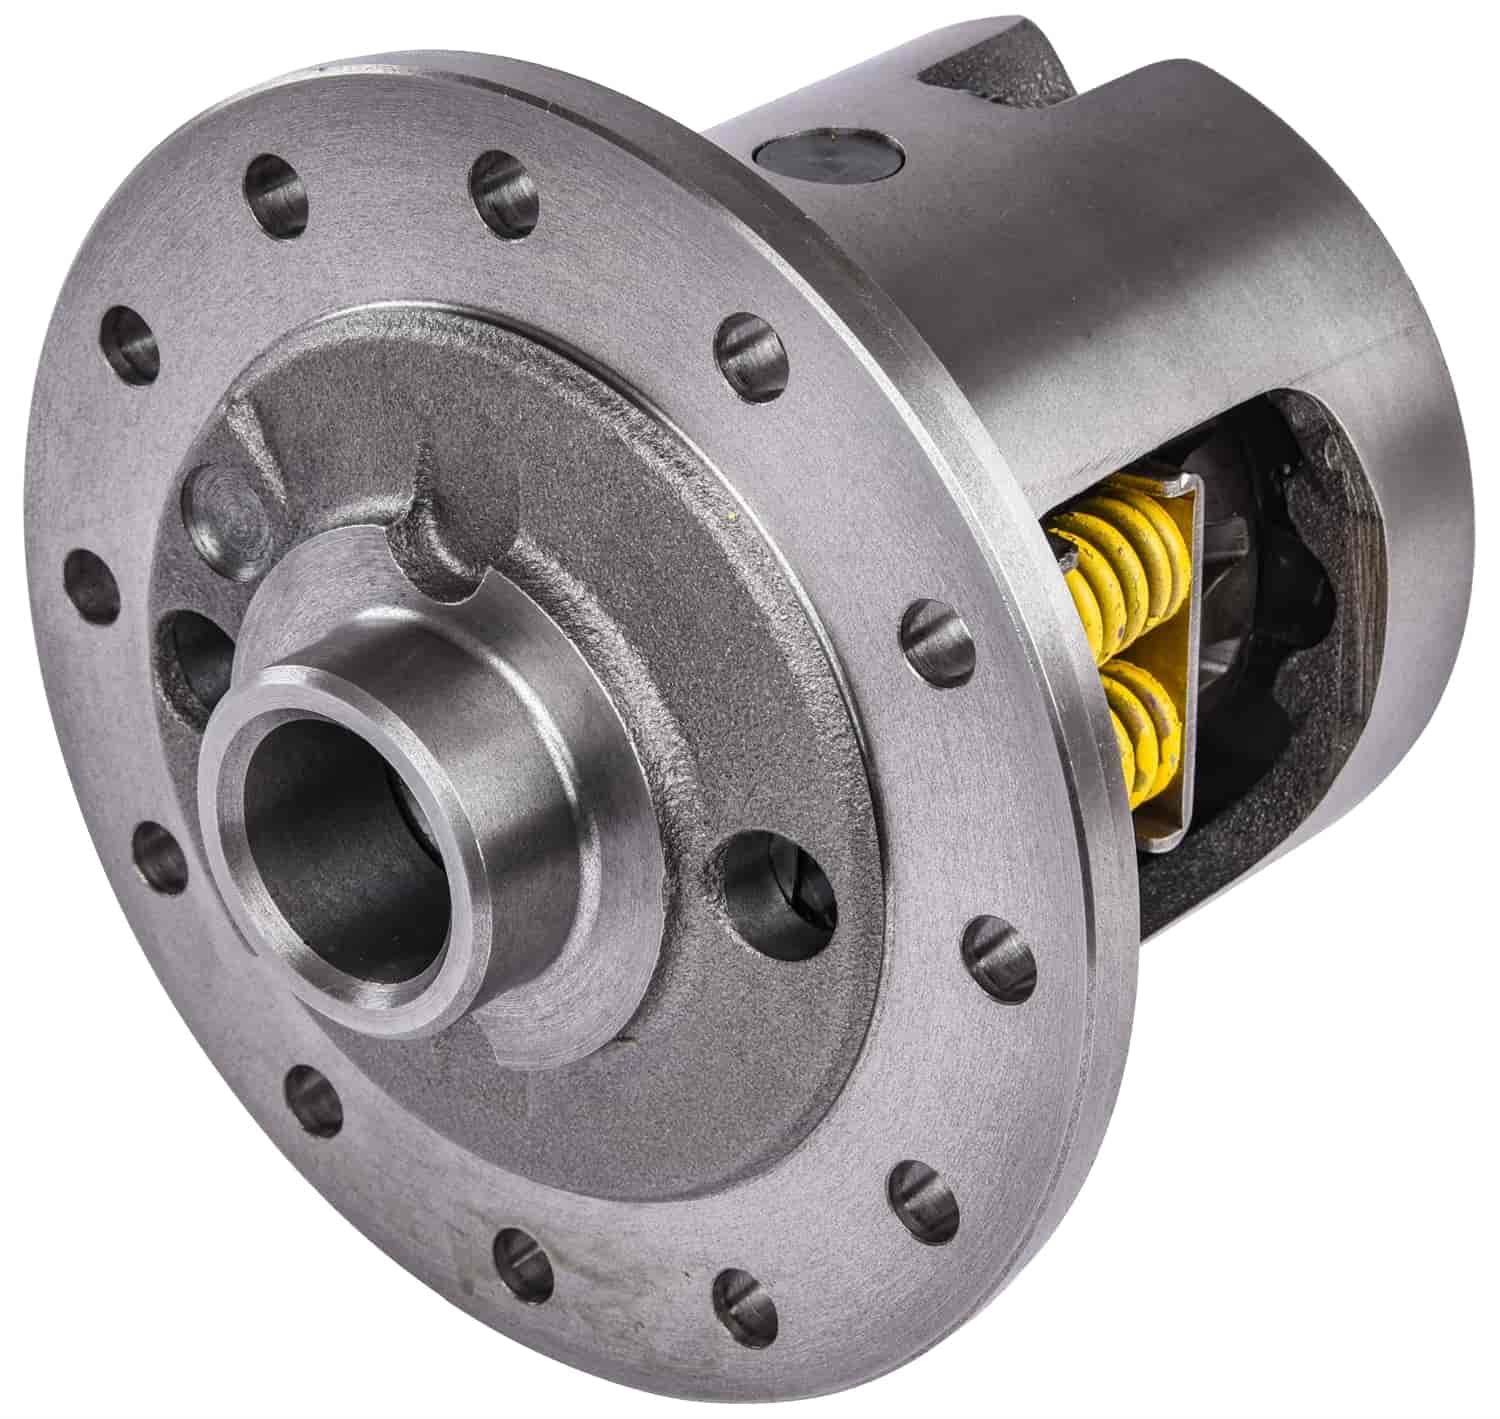 Posi Traction Differential for Ford/Lincoln Trucks Rear, Ford 9.75" 34-Spline [All Ratios]